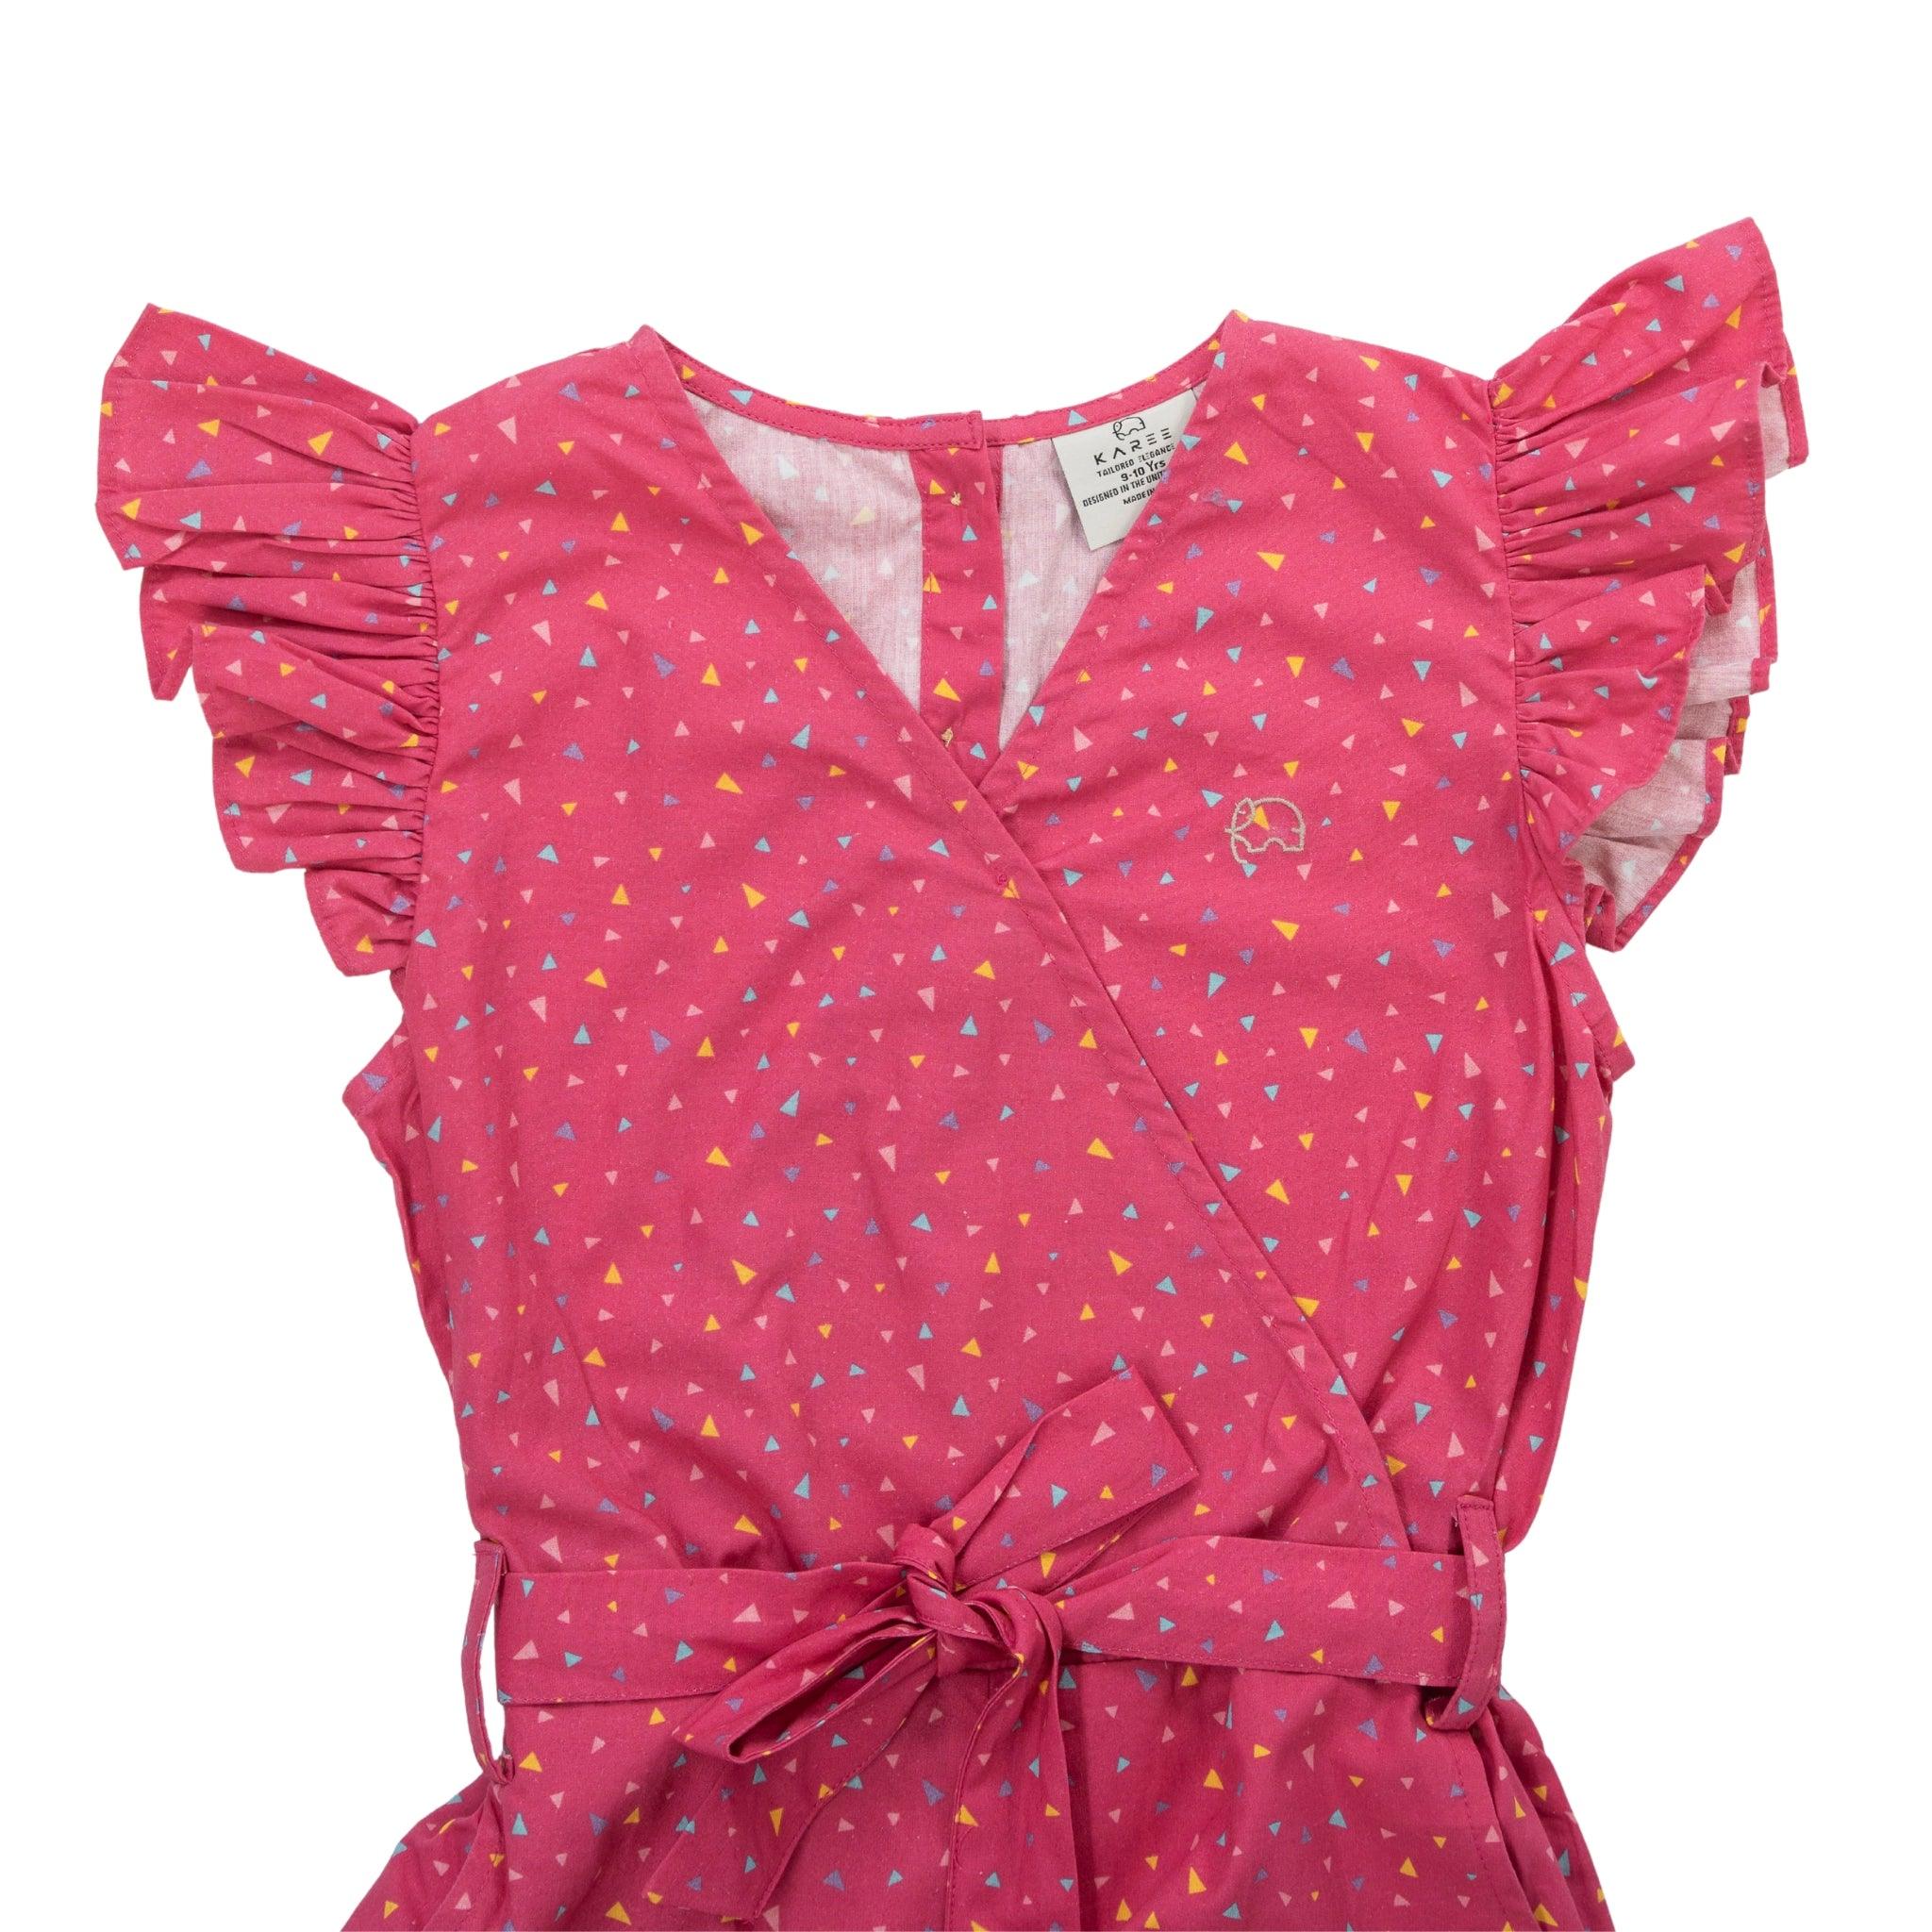 Red Rose Cotton Jumpsuit for Girls by Karee, with ruffle sleeves and yellow triangle patterns, isolated on a white background.